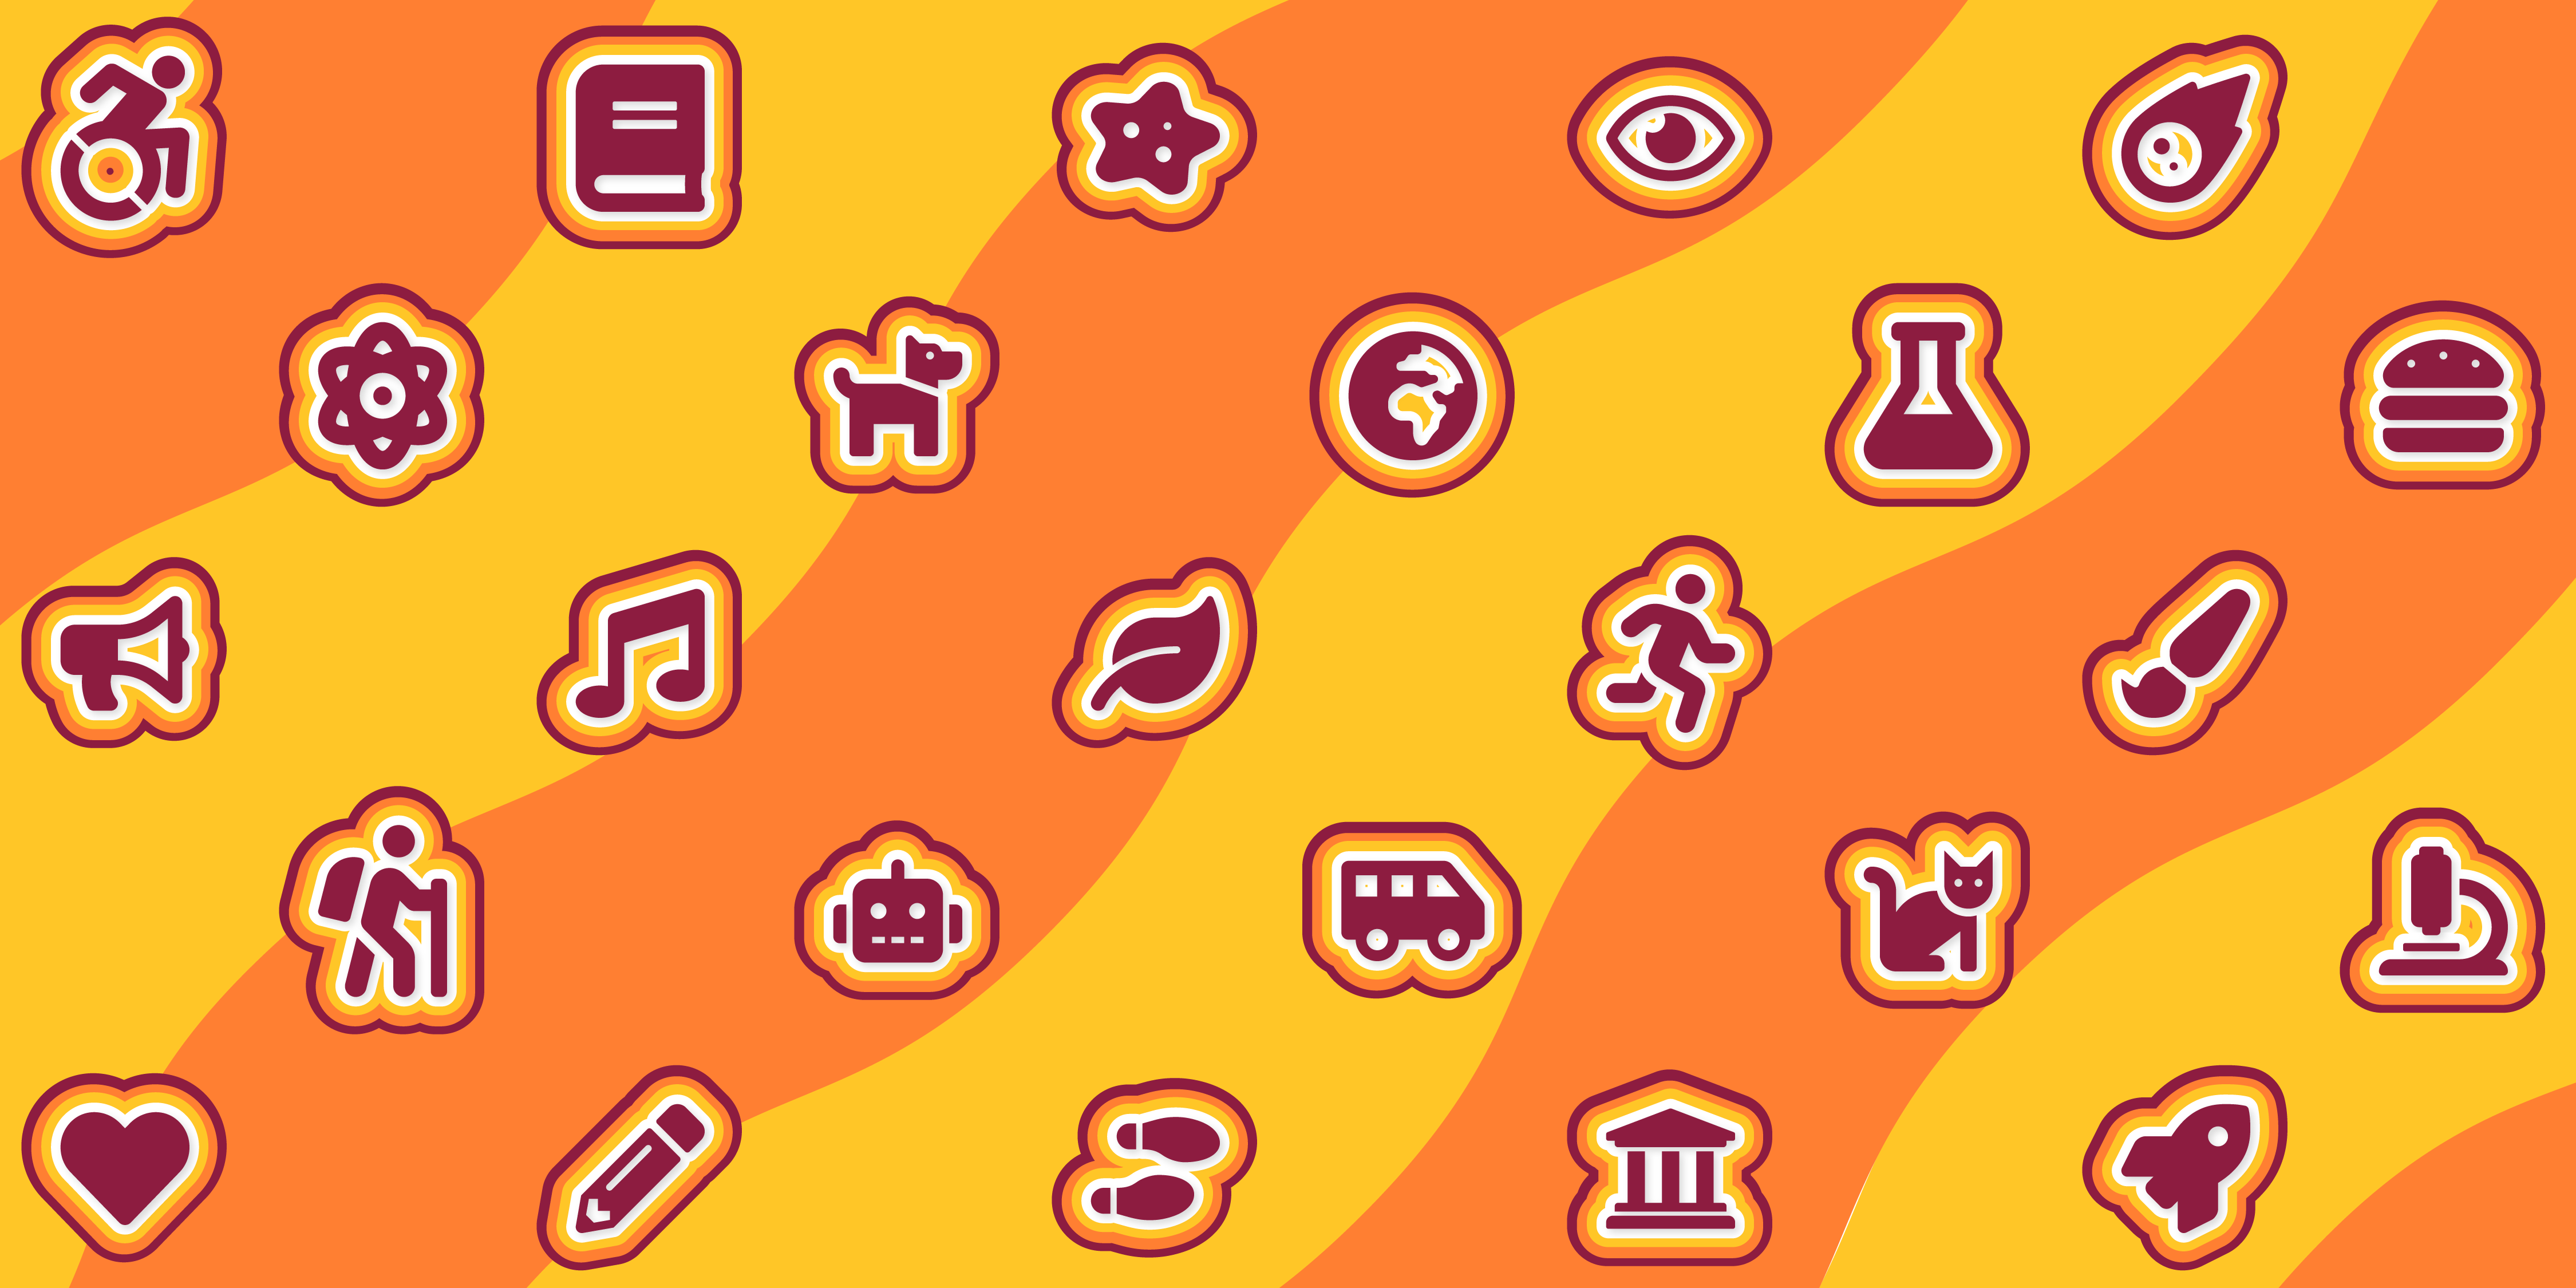 Icons of atoms, dogs, music notes, buses, robots, and more on a yellow and orange background